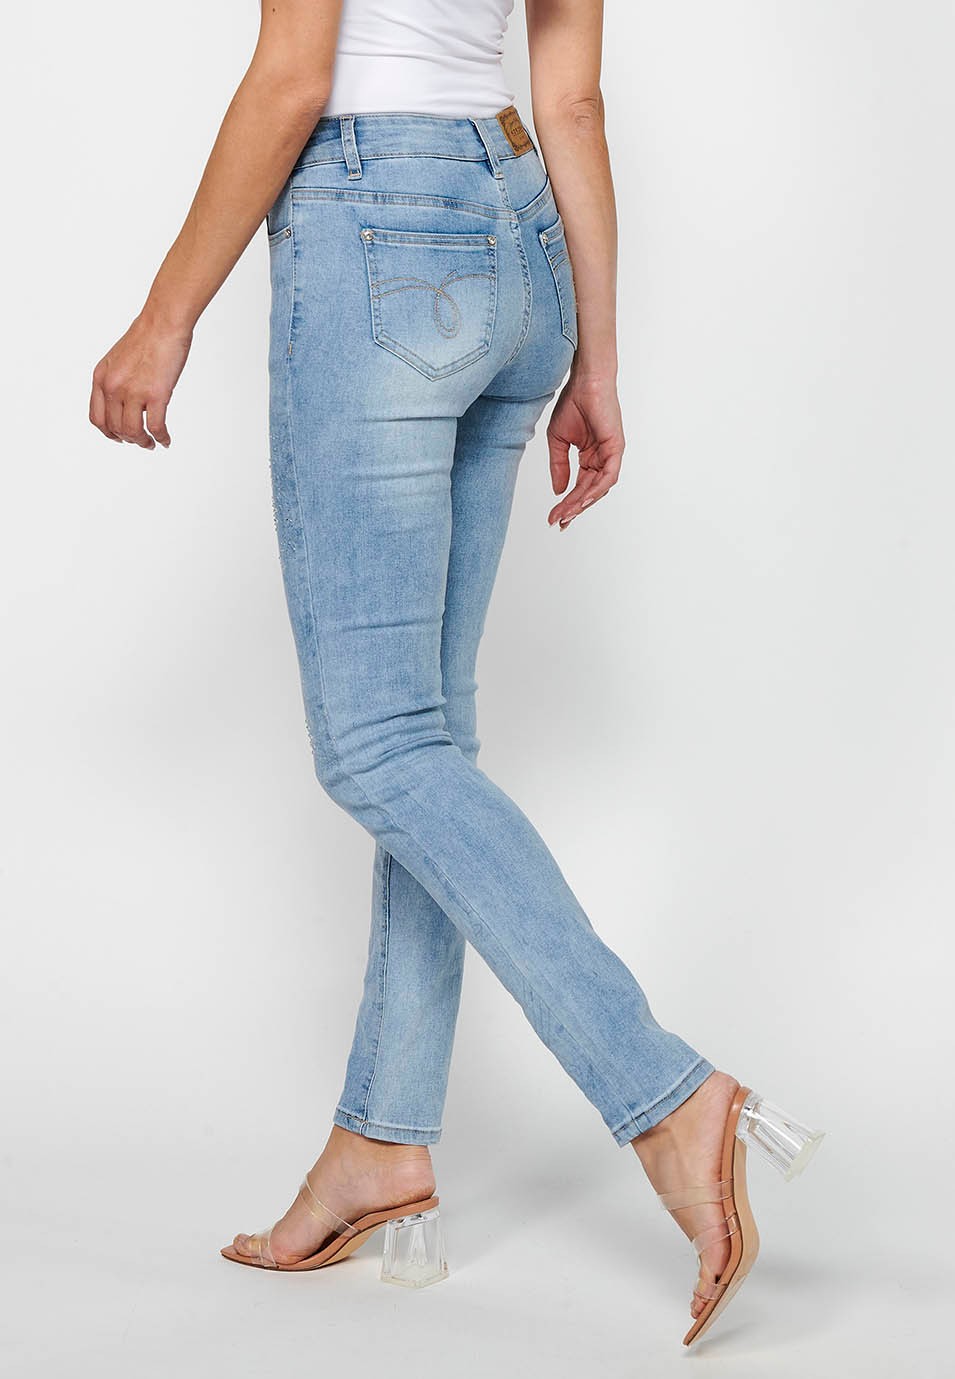 Long slim denim pants with floral details and front closure with zipper and button in Light Blue for Women 5